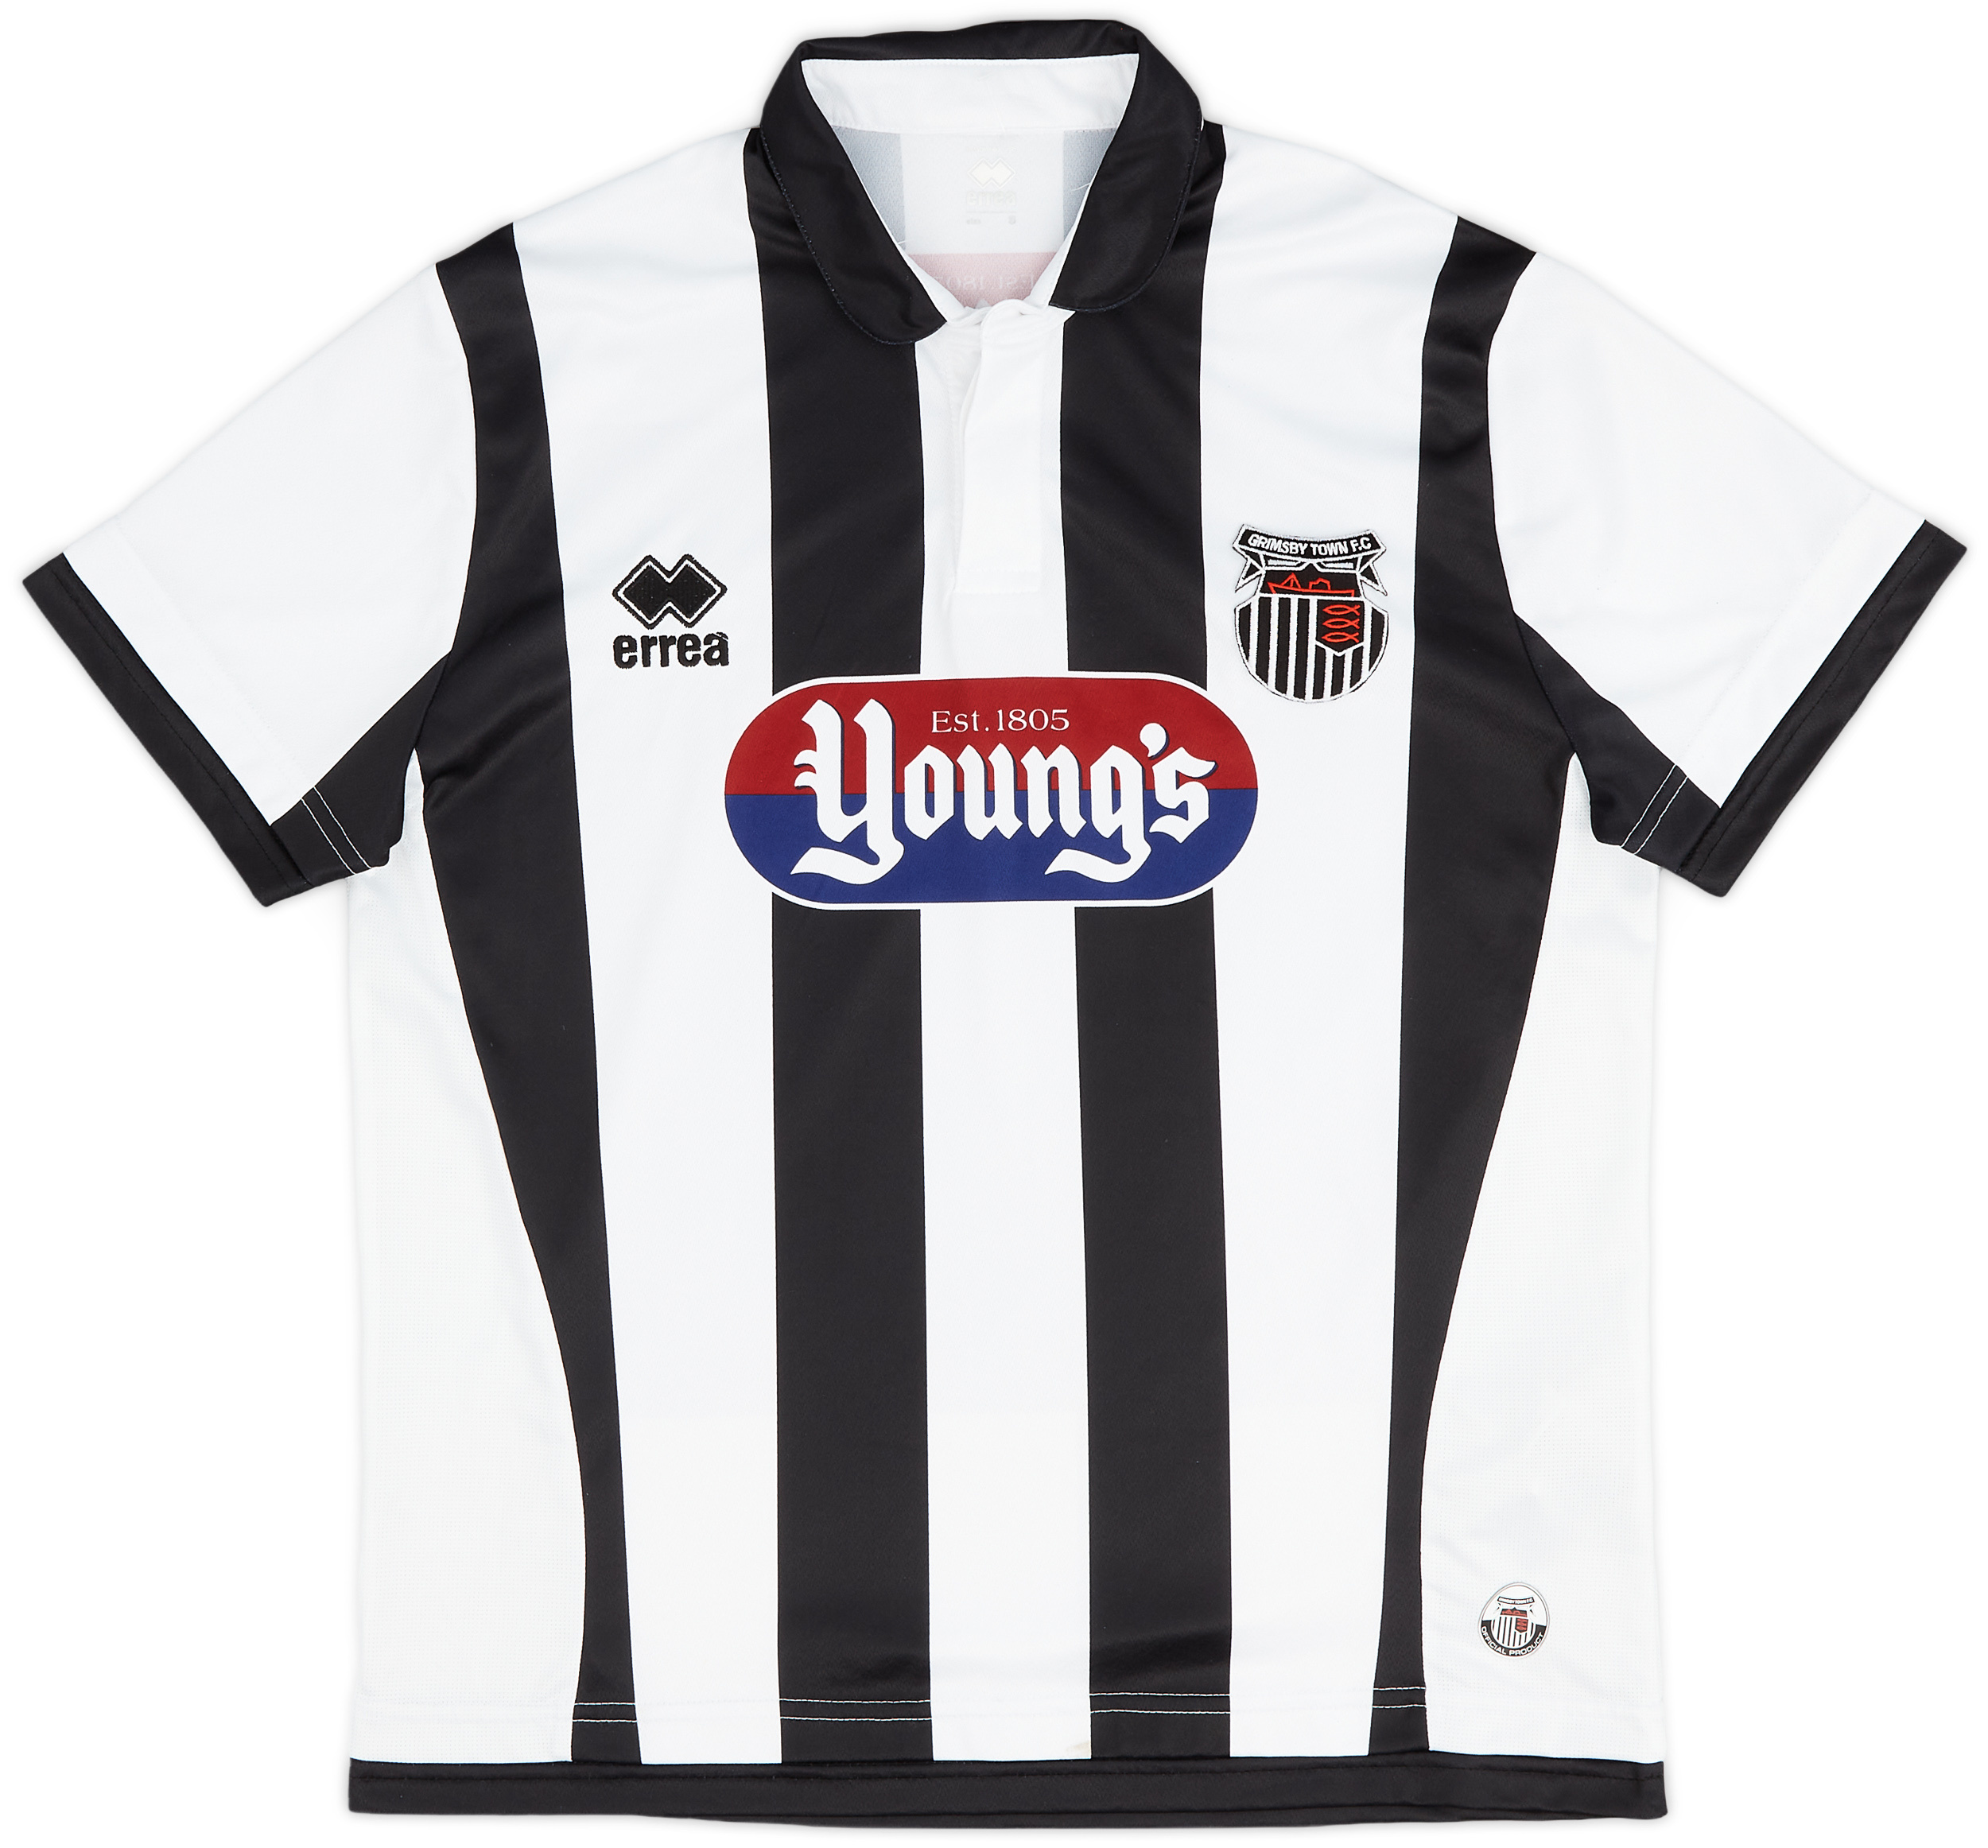 2012-13 Grimsby Town Home Shirt - 9/10 - ()